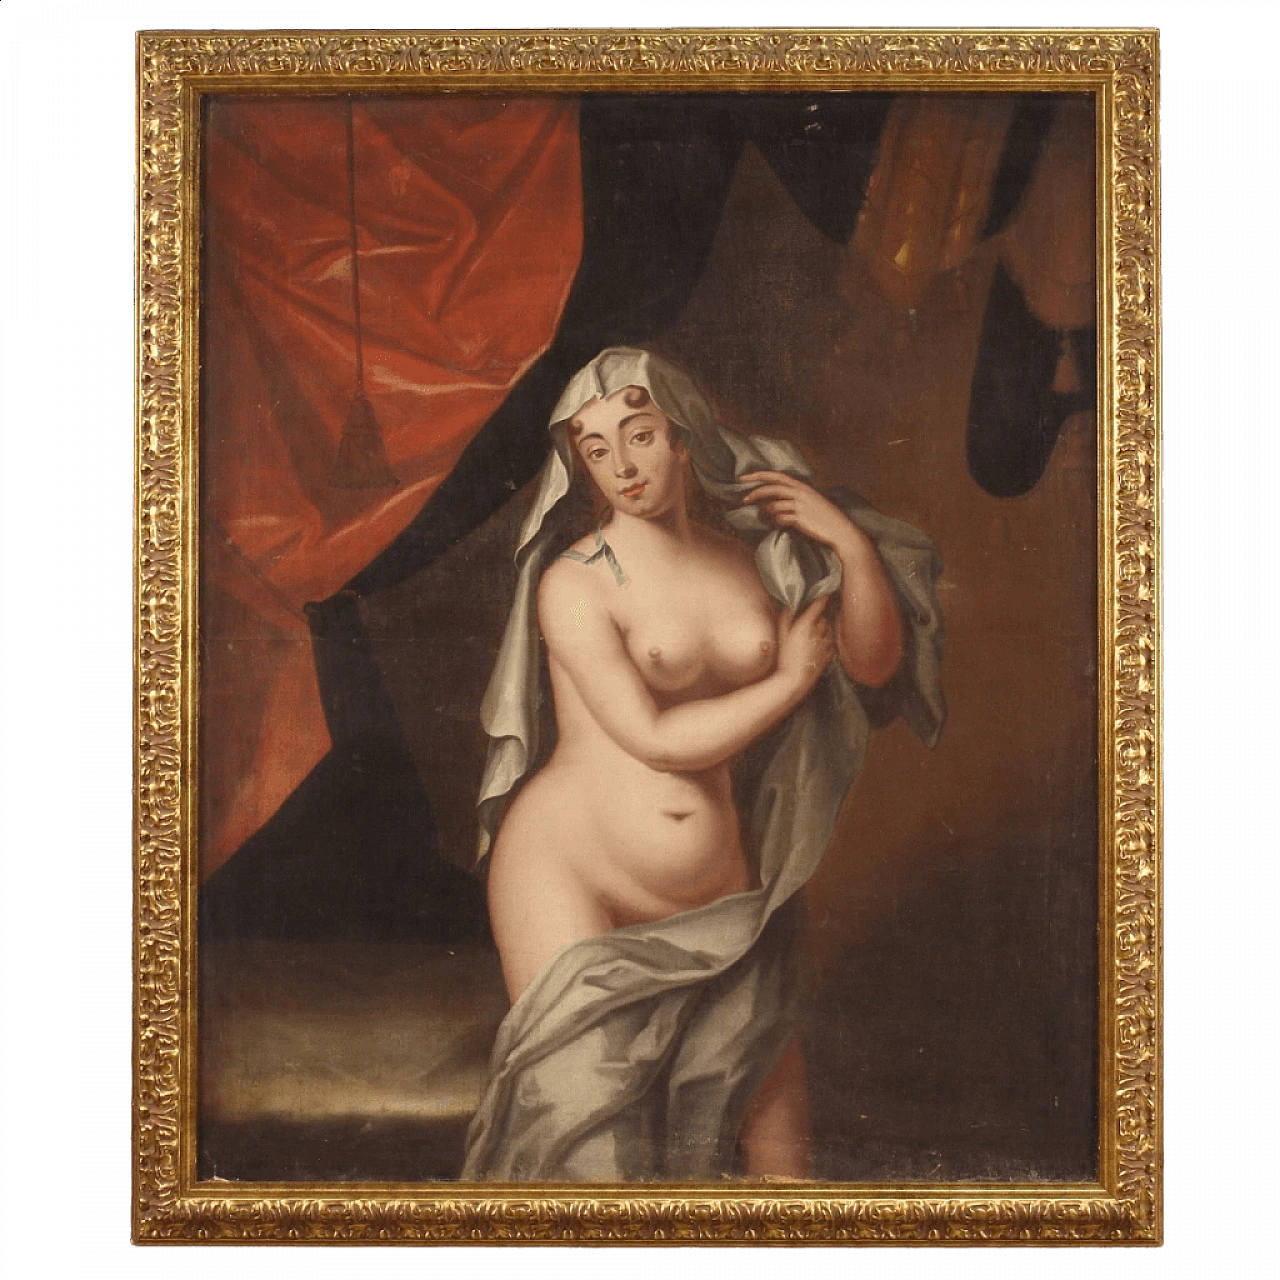 Nude of a woman, oil painting on canvas, 17th century 13